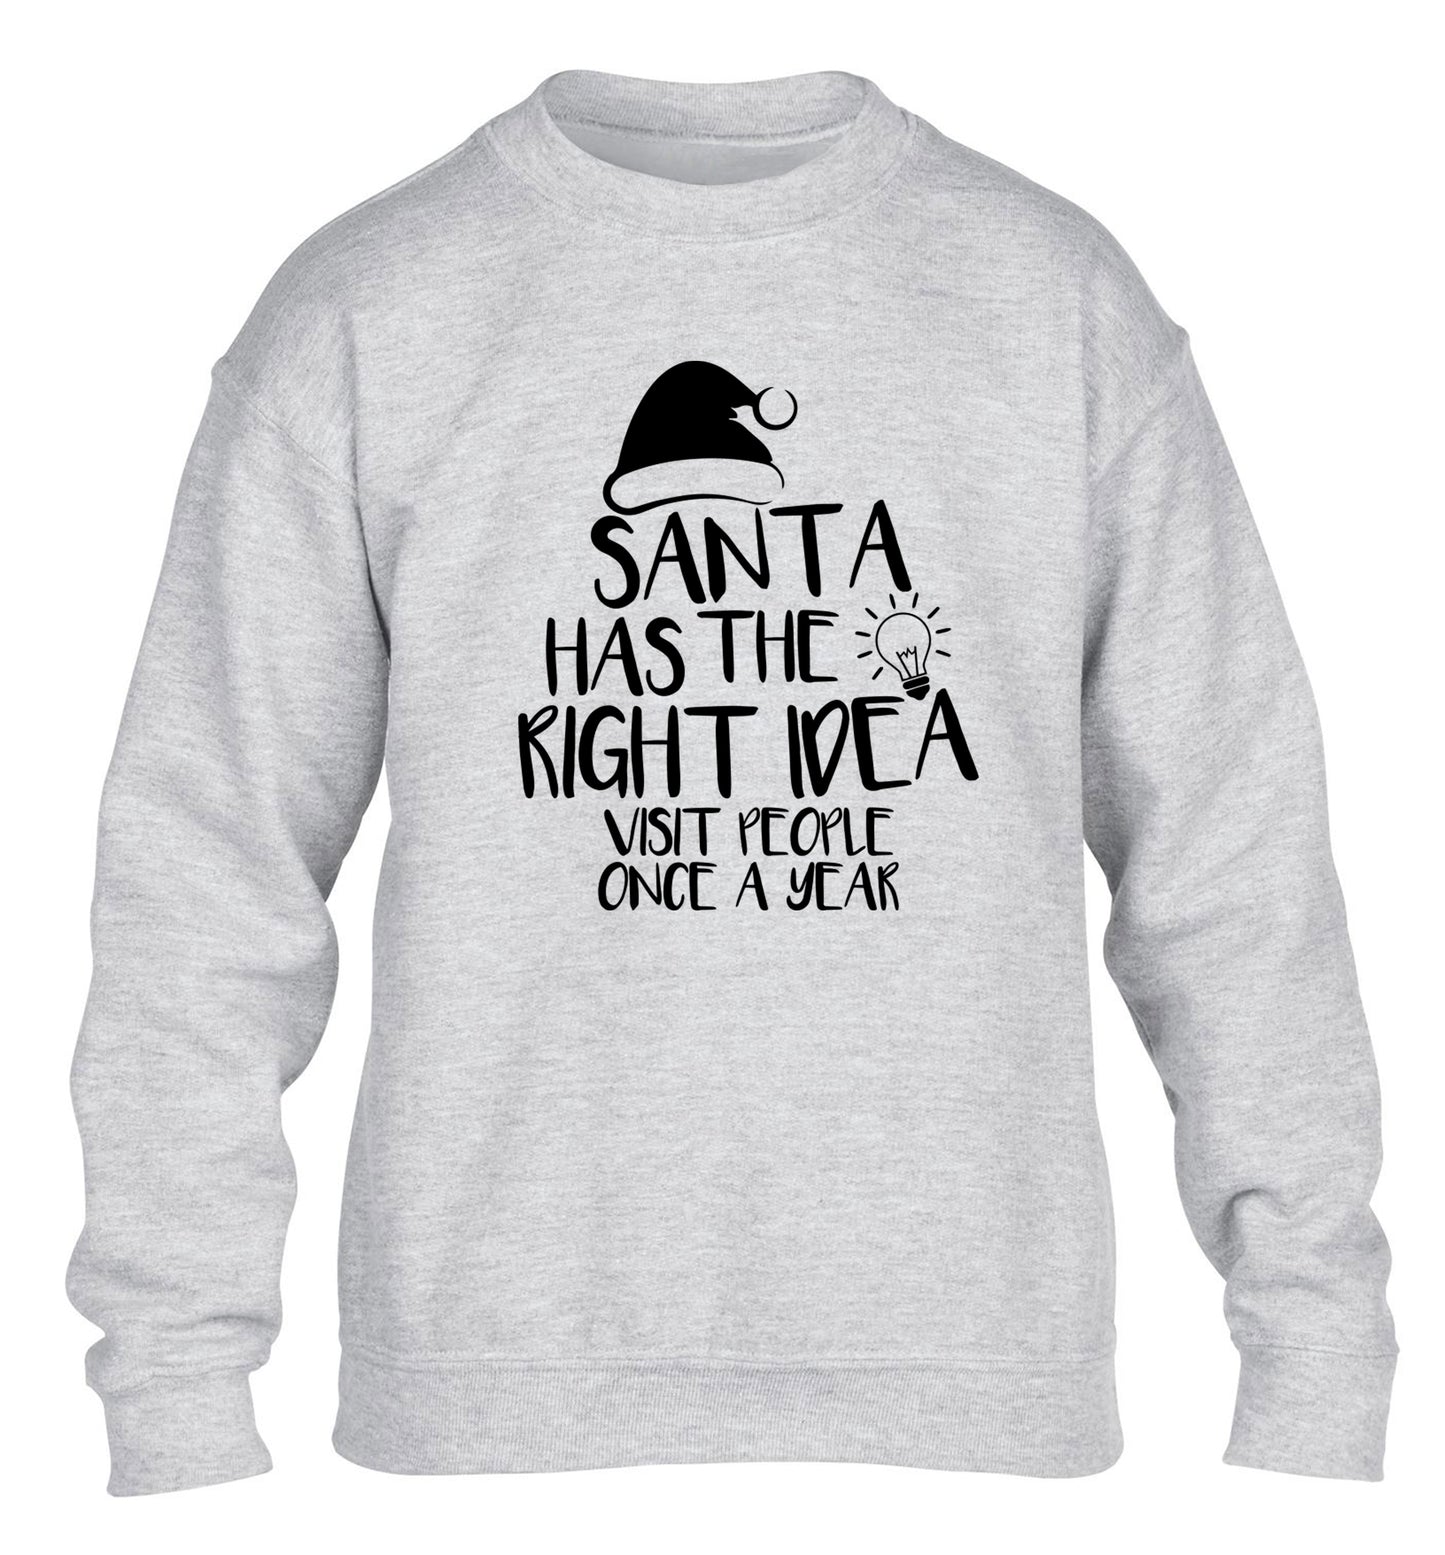 Santa has the right idea visit people once a year children's grey sweater 12-14 Years